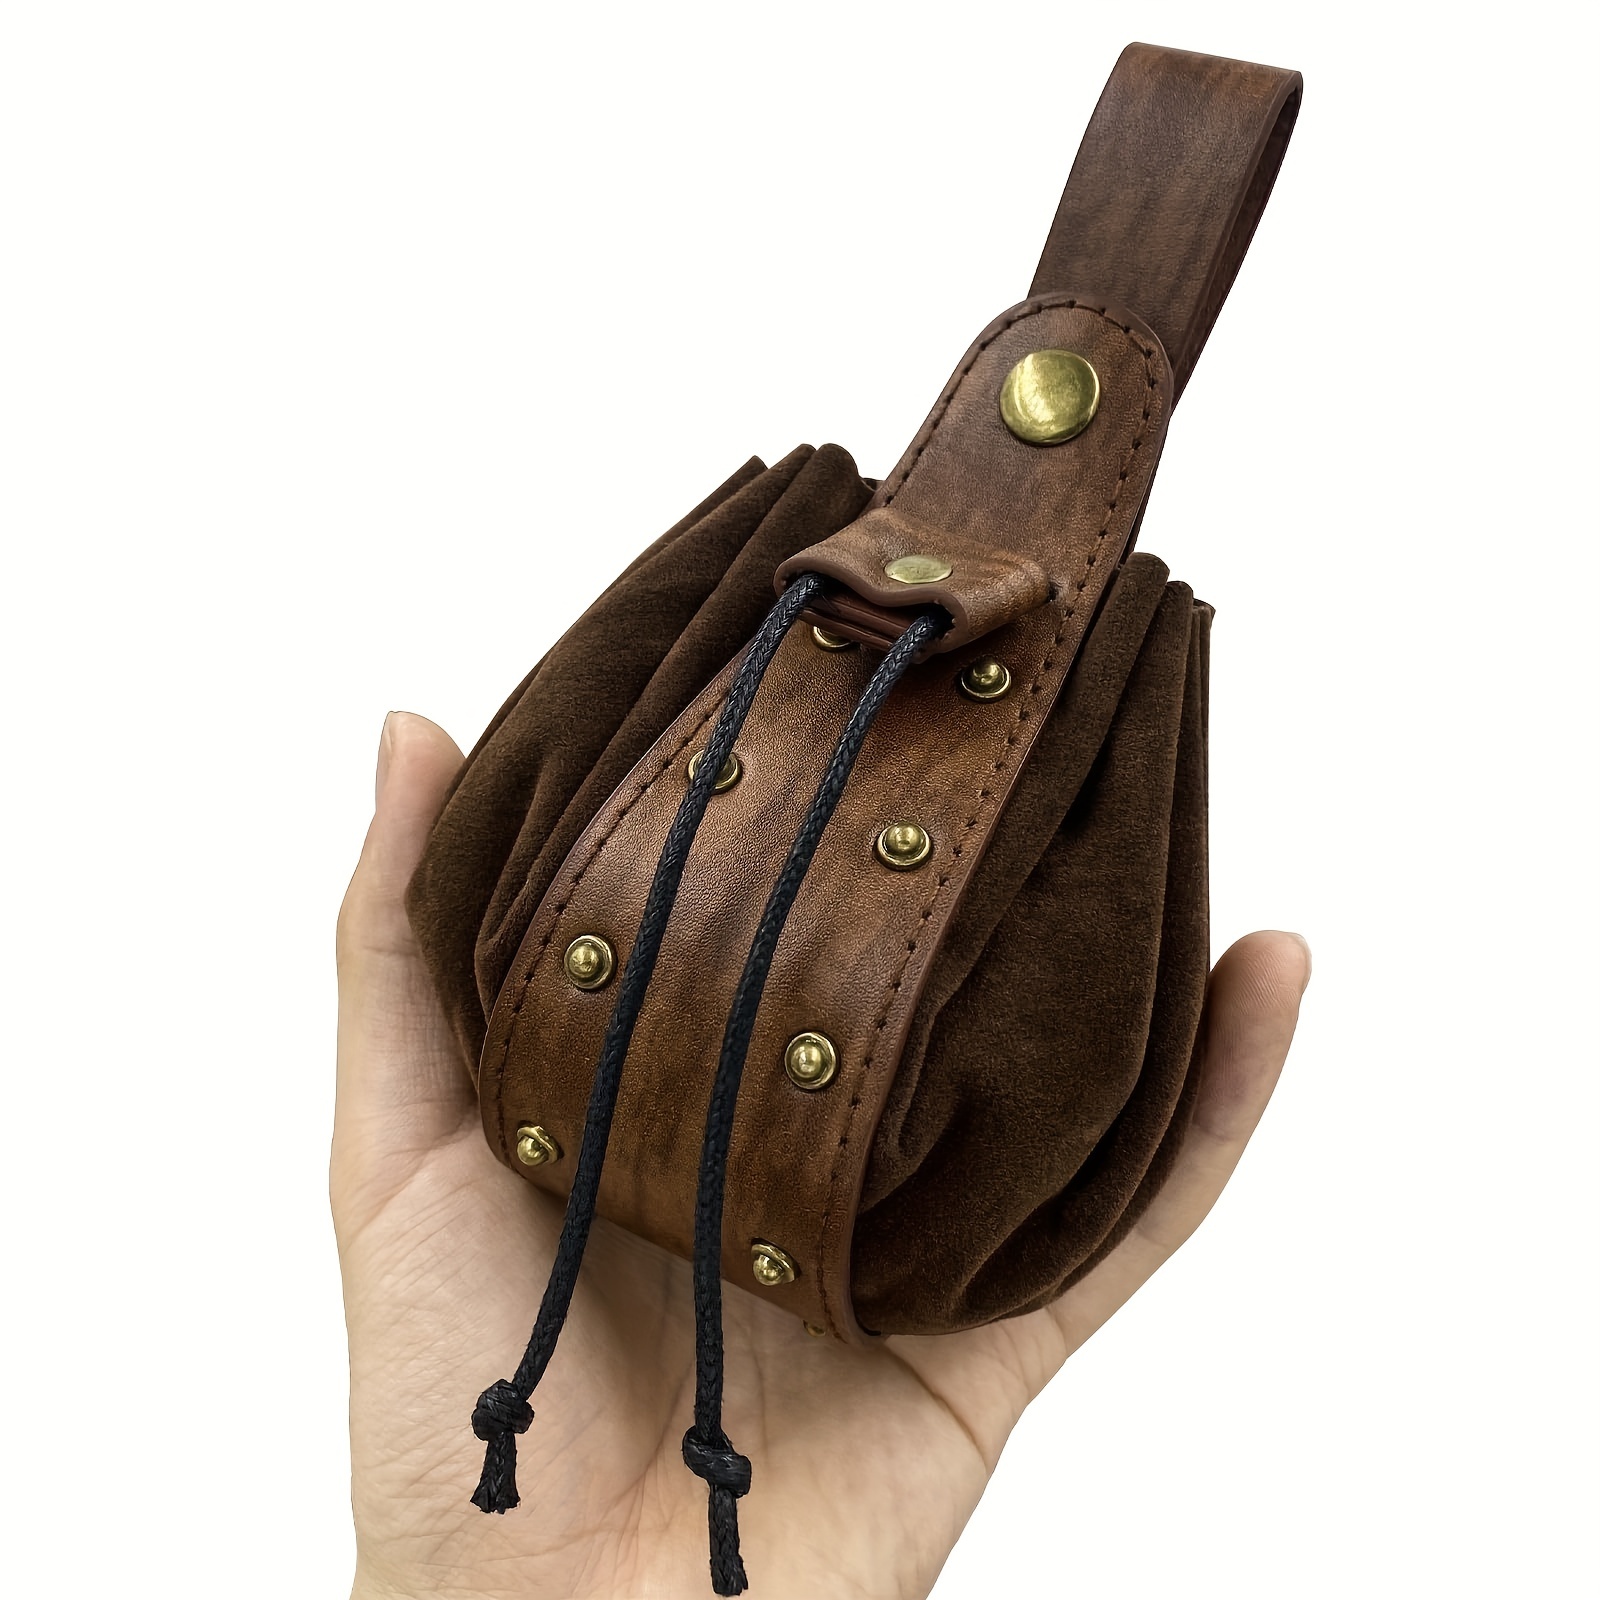 Haikyuu Medieval PU Leather Pouch Leather Drawstring Pouch Coin Purse Storage Renaissance Dice Bag (M, Brown)